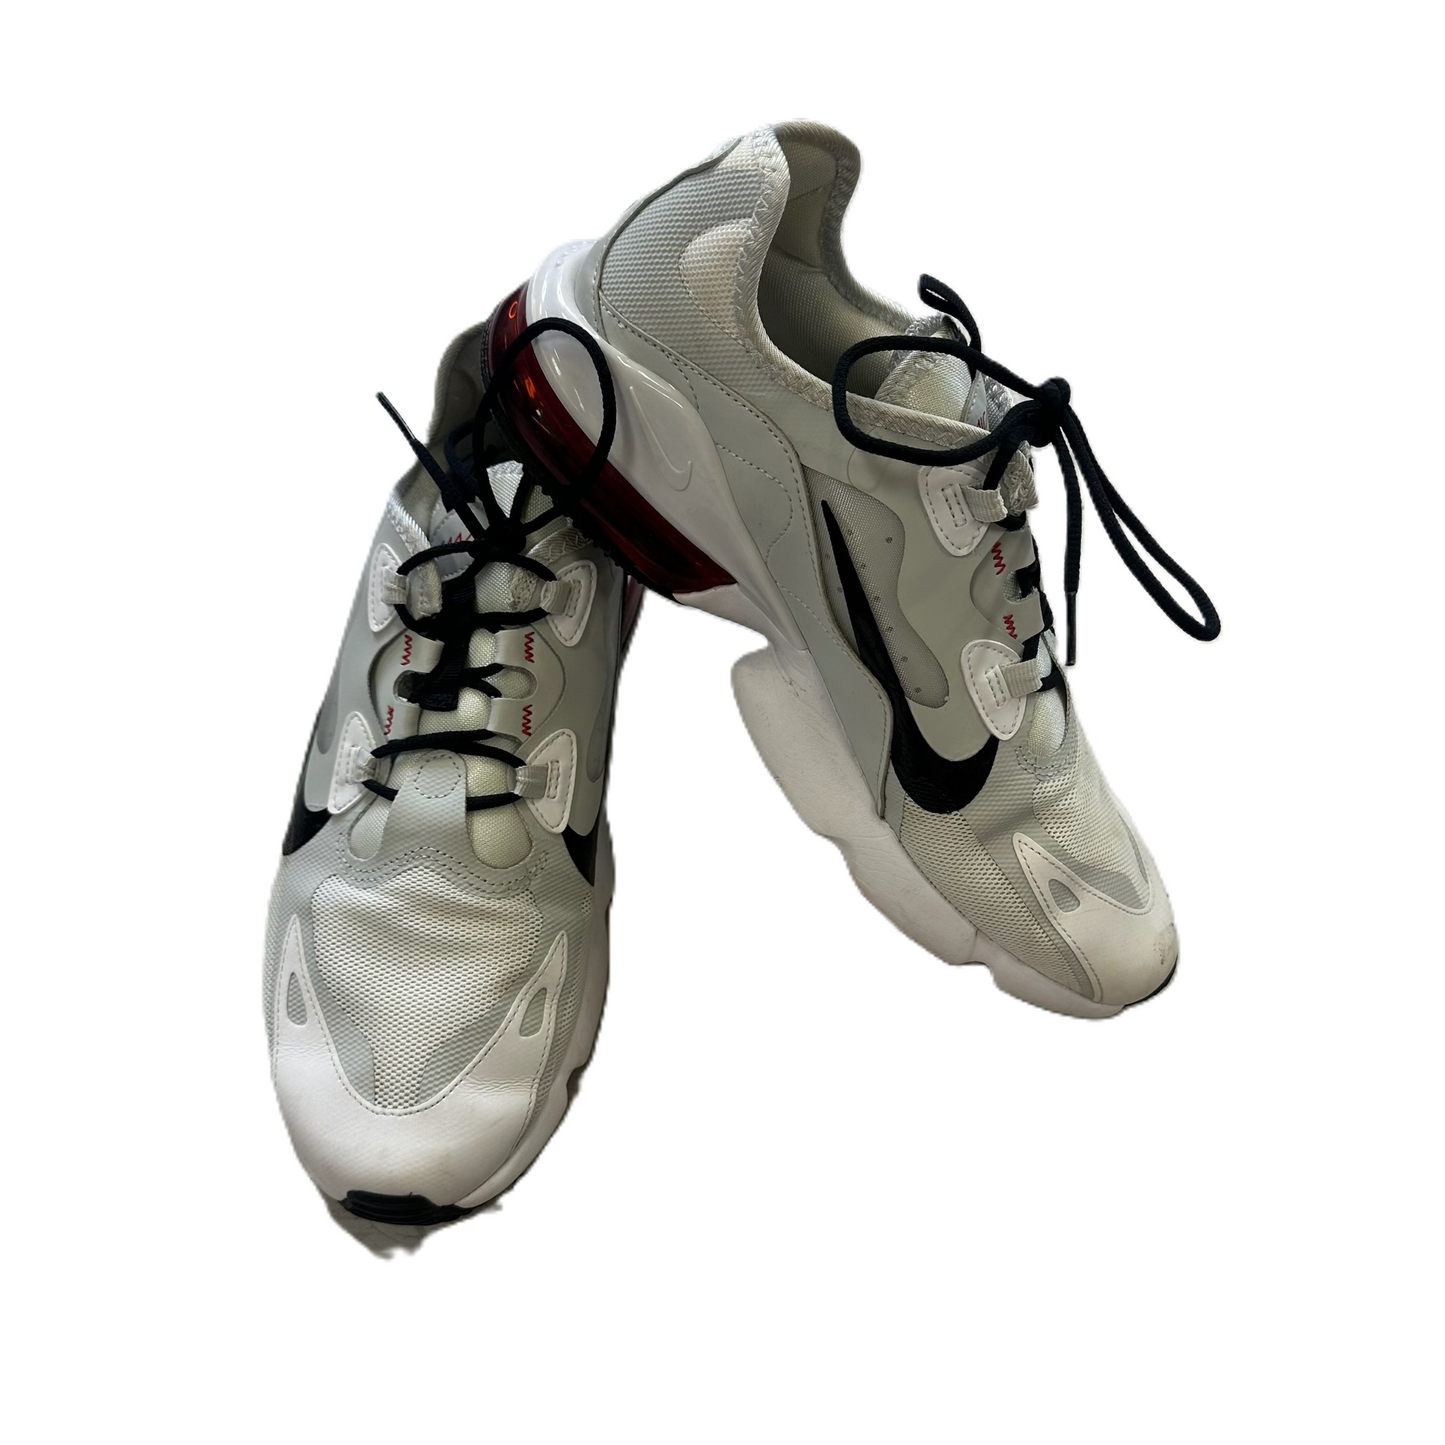 White Shoes Athletic By Nike, Size: 9.5